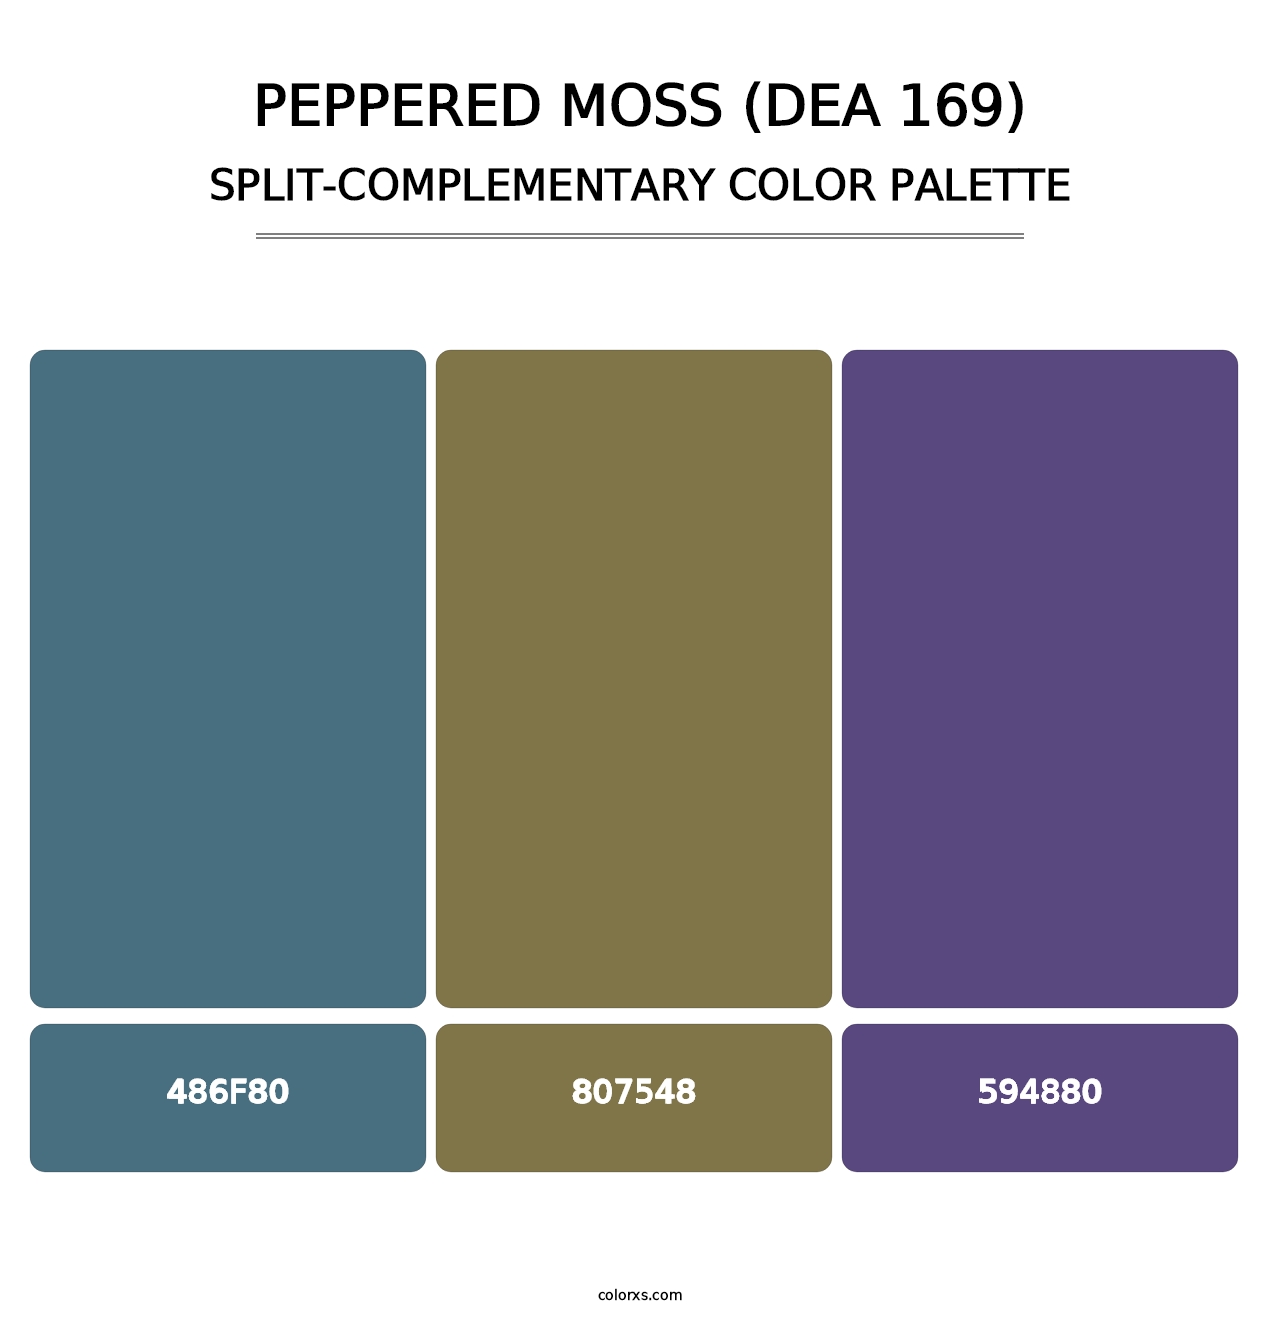 Peppered Moss (DEA 169) - Split-Complementary Color Palette